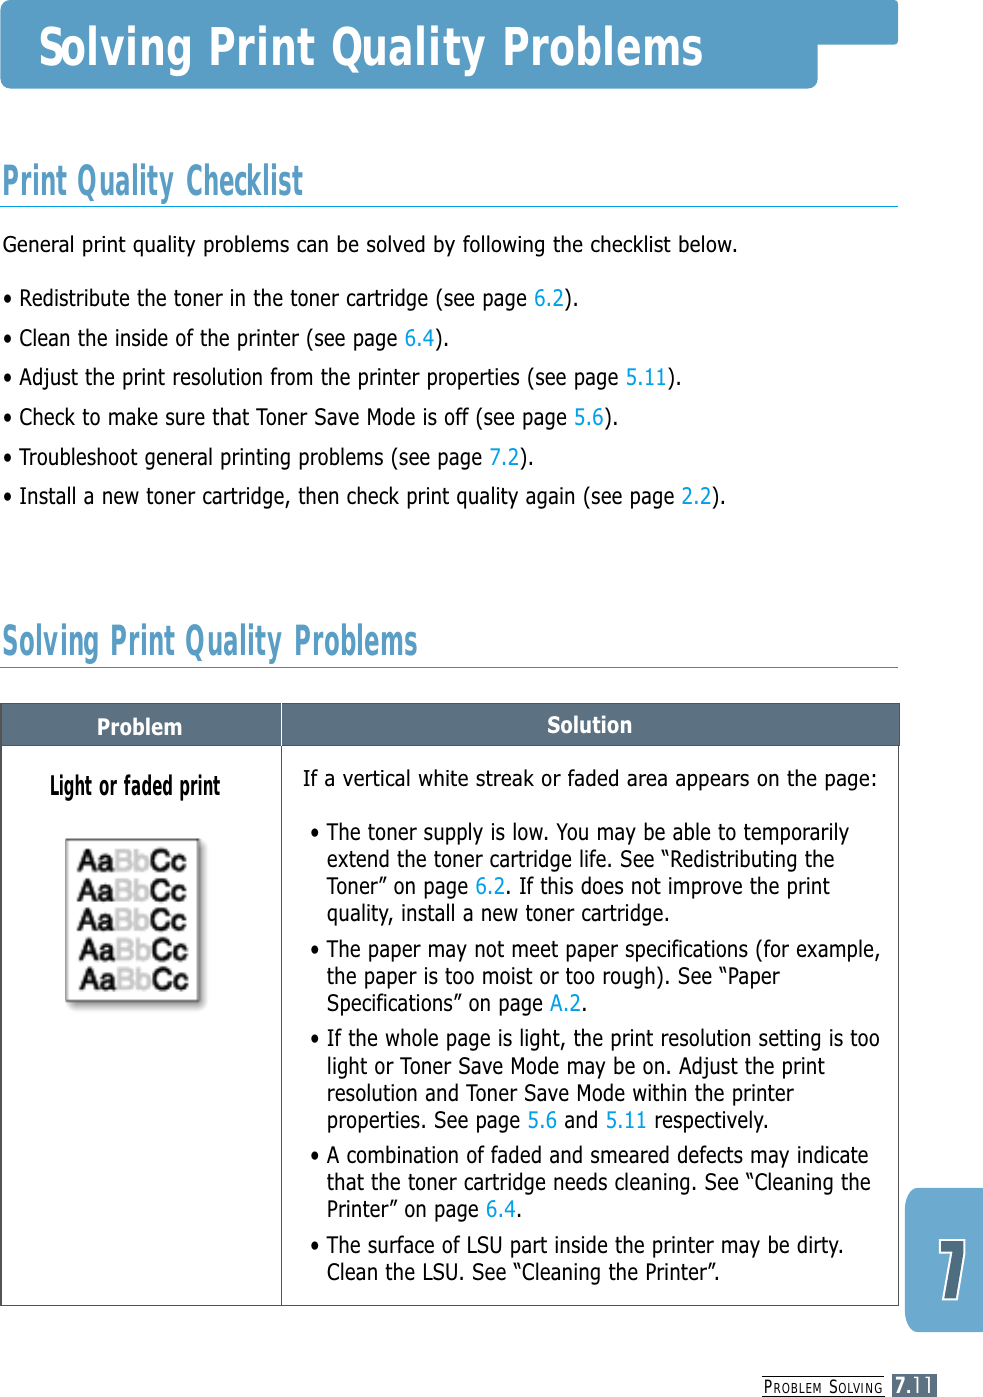 PROBLEM SOLVING7.11Problem SolutionSolving Print Quality ProblemsGeneral print quality problems can be solved by following the checklist below.• Redistribute the toner in the toner cartridge (see page 6.2).• Clean the inside of the printer (see page 6.4).• Adjust the print resolution from the printer properties (see page 5.11).• Check to make sure that Toner Save Mode is off (see page 5.6).• Troubleshoot general printing problems (see page 7.2).• Install a new toner cartridge, then check print quality again (see page 2.2). Print Quality ChecklistSolving Print Quality ProblemsIf a vertical white streak or faded area appears on the page:• The toner supply is low. You may be able to temporarilyextend the toner cartridge life. See “Redistributing theToner” on page 6.2. If this does not improve the printquality, install a new toner cartridge.• The paper may not meet paper specifications (for example,the paper is too moist or too rough). See “PaperSpecifications” on page A.2.• If the whole page is light, the print resolution setting is toolight or Toner Save Mode may be on. Adjust the printresolution and Toner Save Mode within the printerproperties. See page 5.6 and 5.11 respectively.• A combination of faded and smeared defects may indicatethat the toner cartridge needs cleaning. See “Cleaning thePrinter” on page 6.4.• The surface of LSU part inside the printer may be dirty.Clean the LSU. See “Cleaning the Printer”.Light or faded print